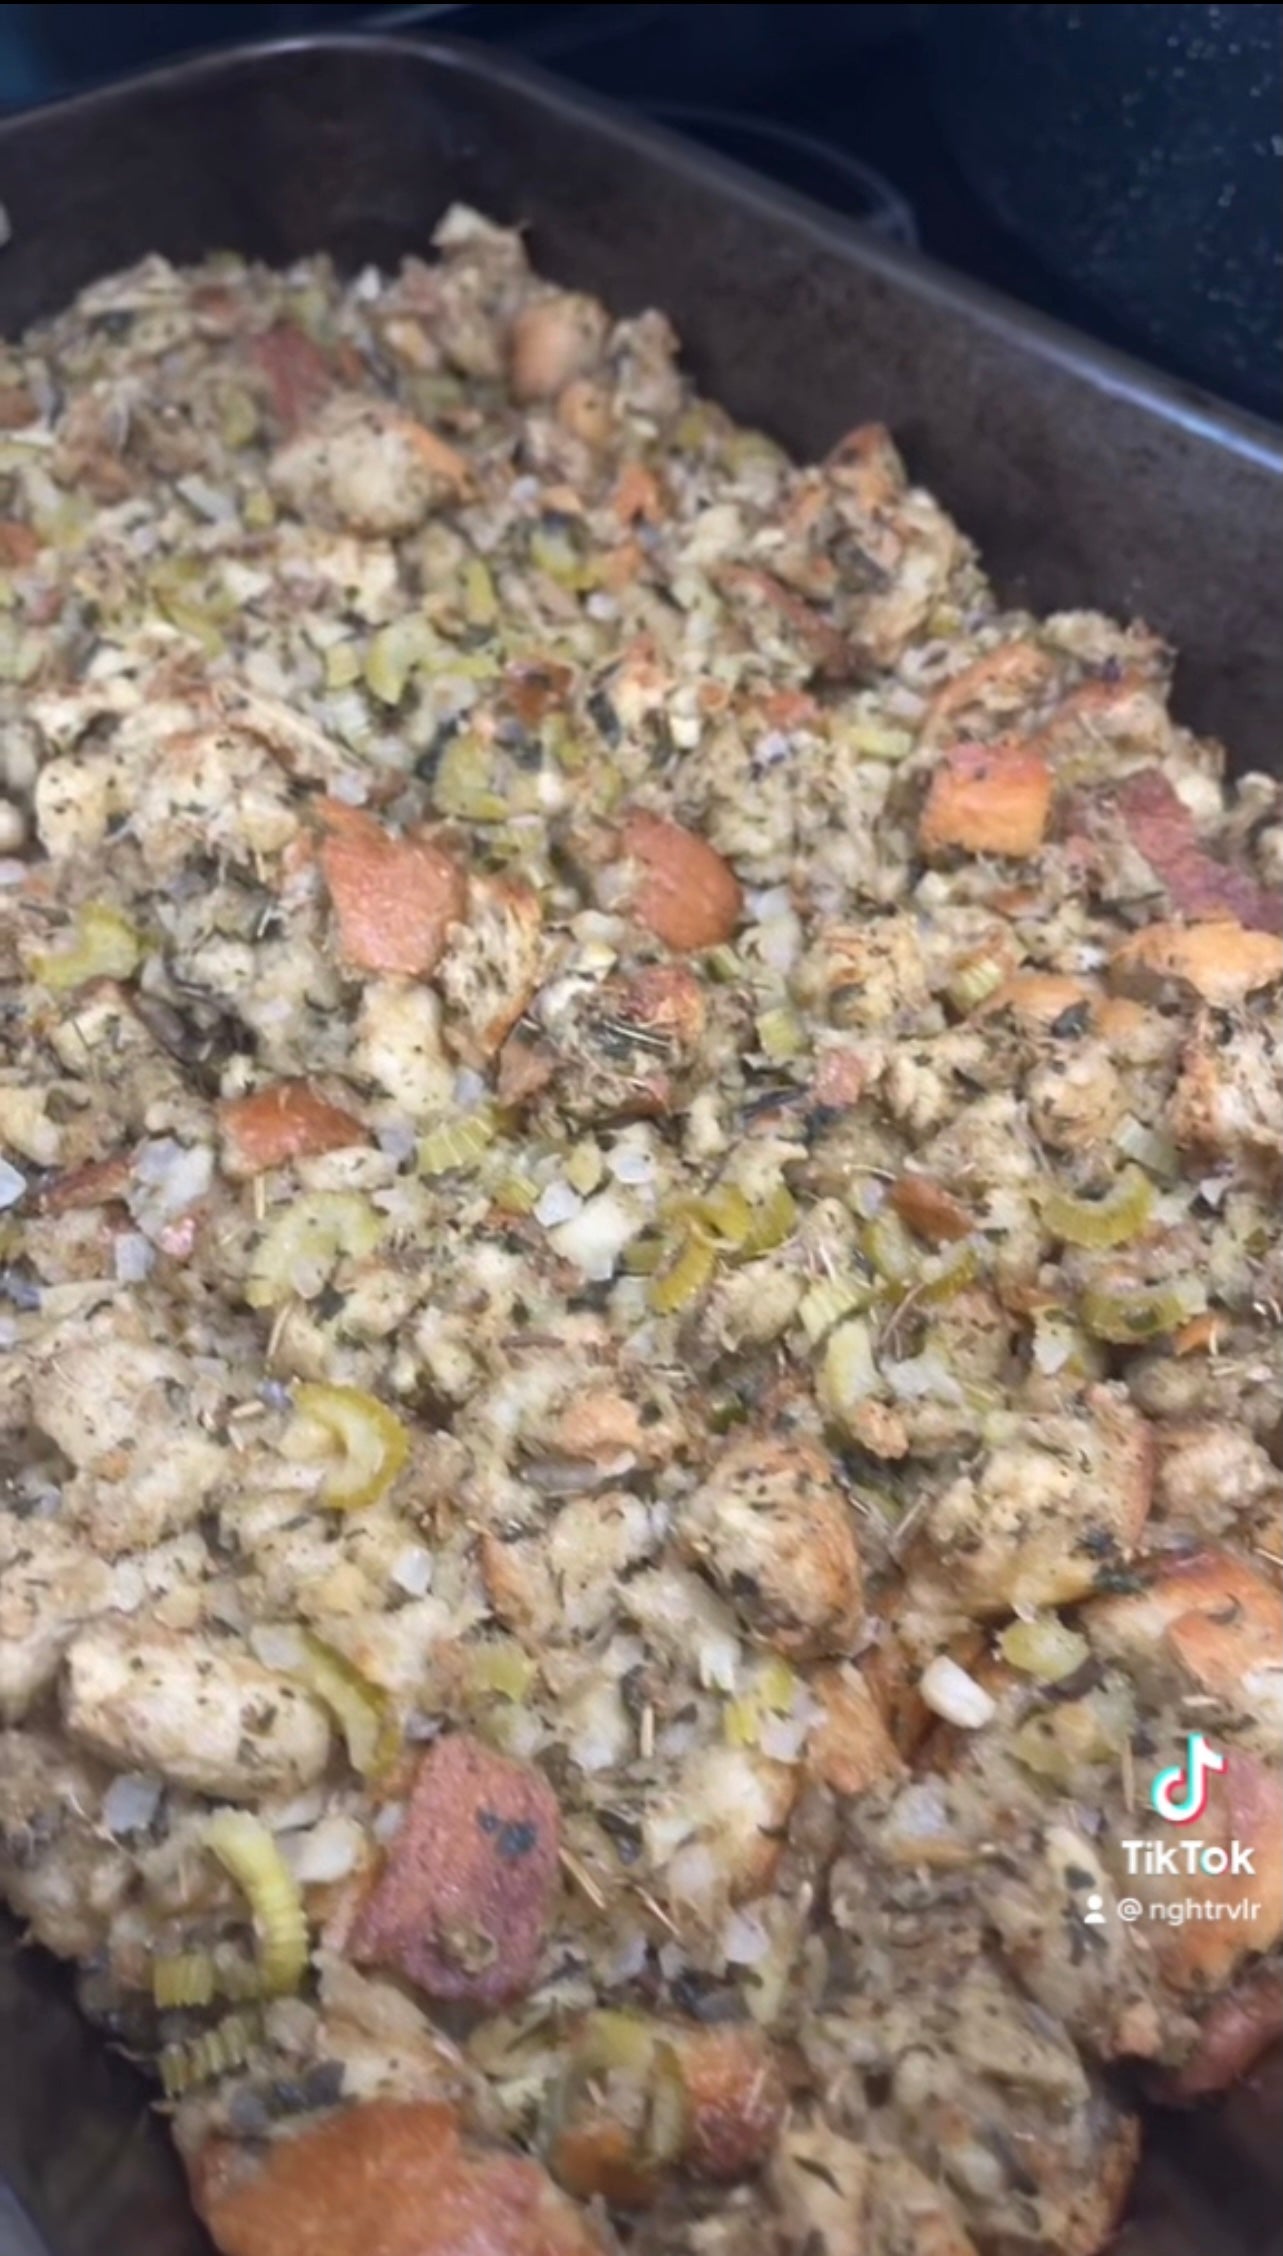 Apple Herb Stuffing – Nghtrvlr